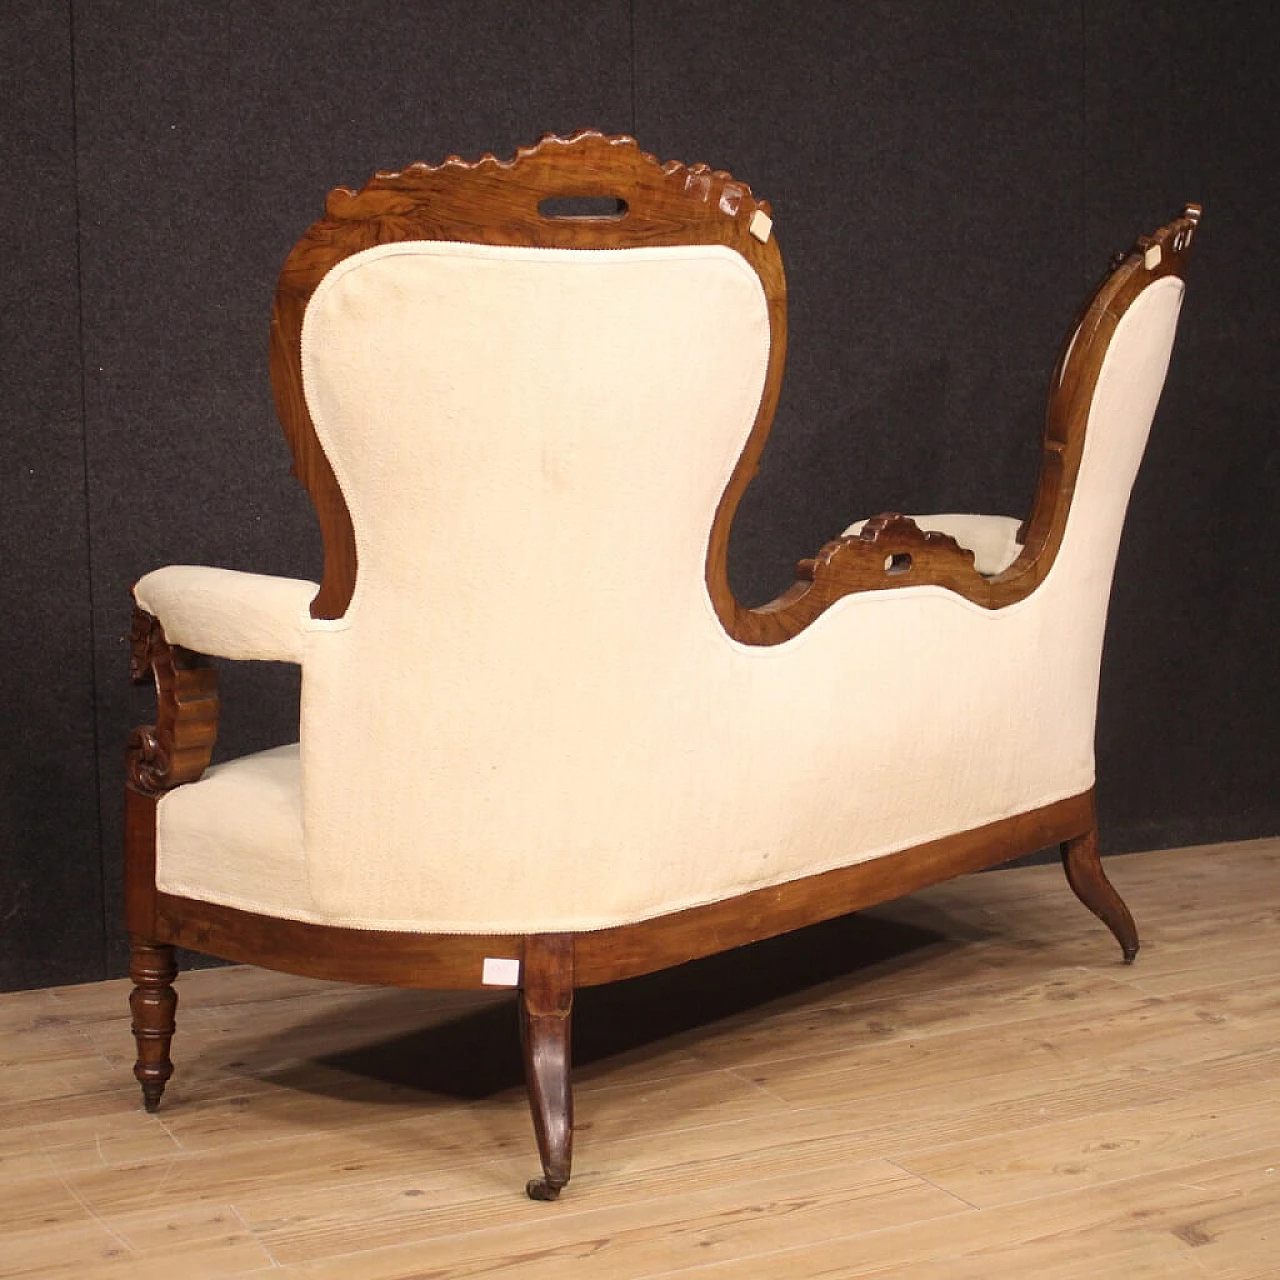 Walnut and fabric sofa with casters, late 19th century 1090596